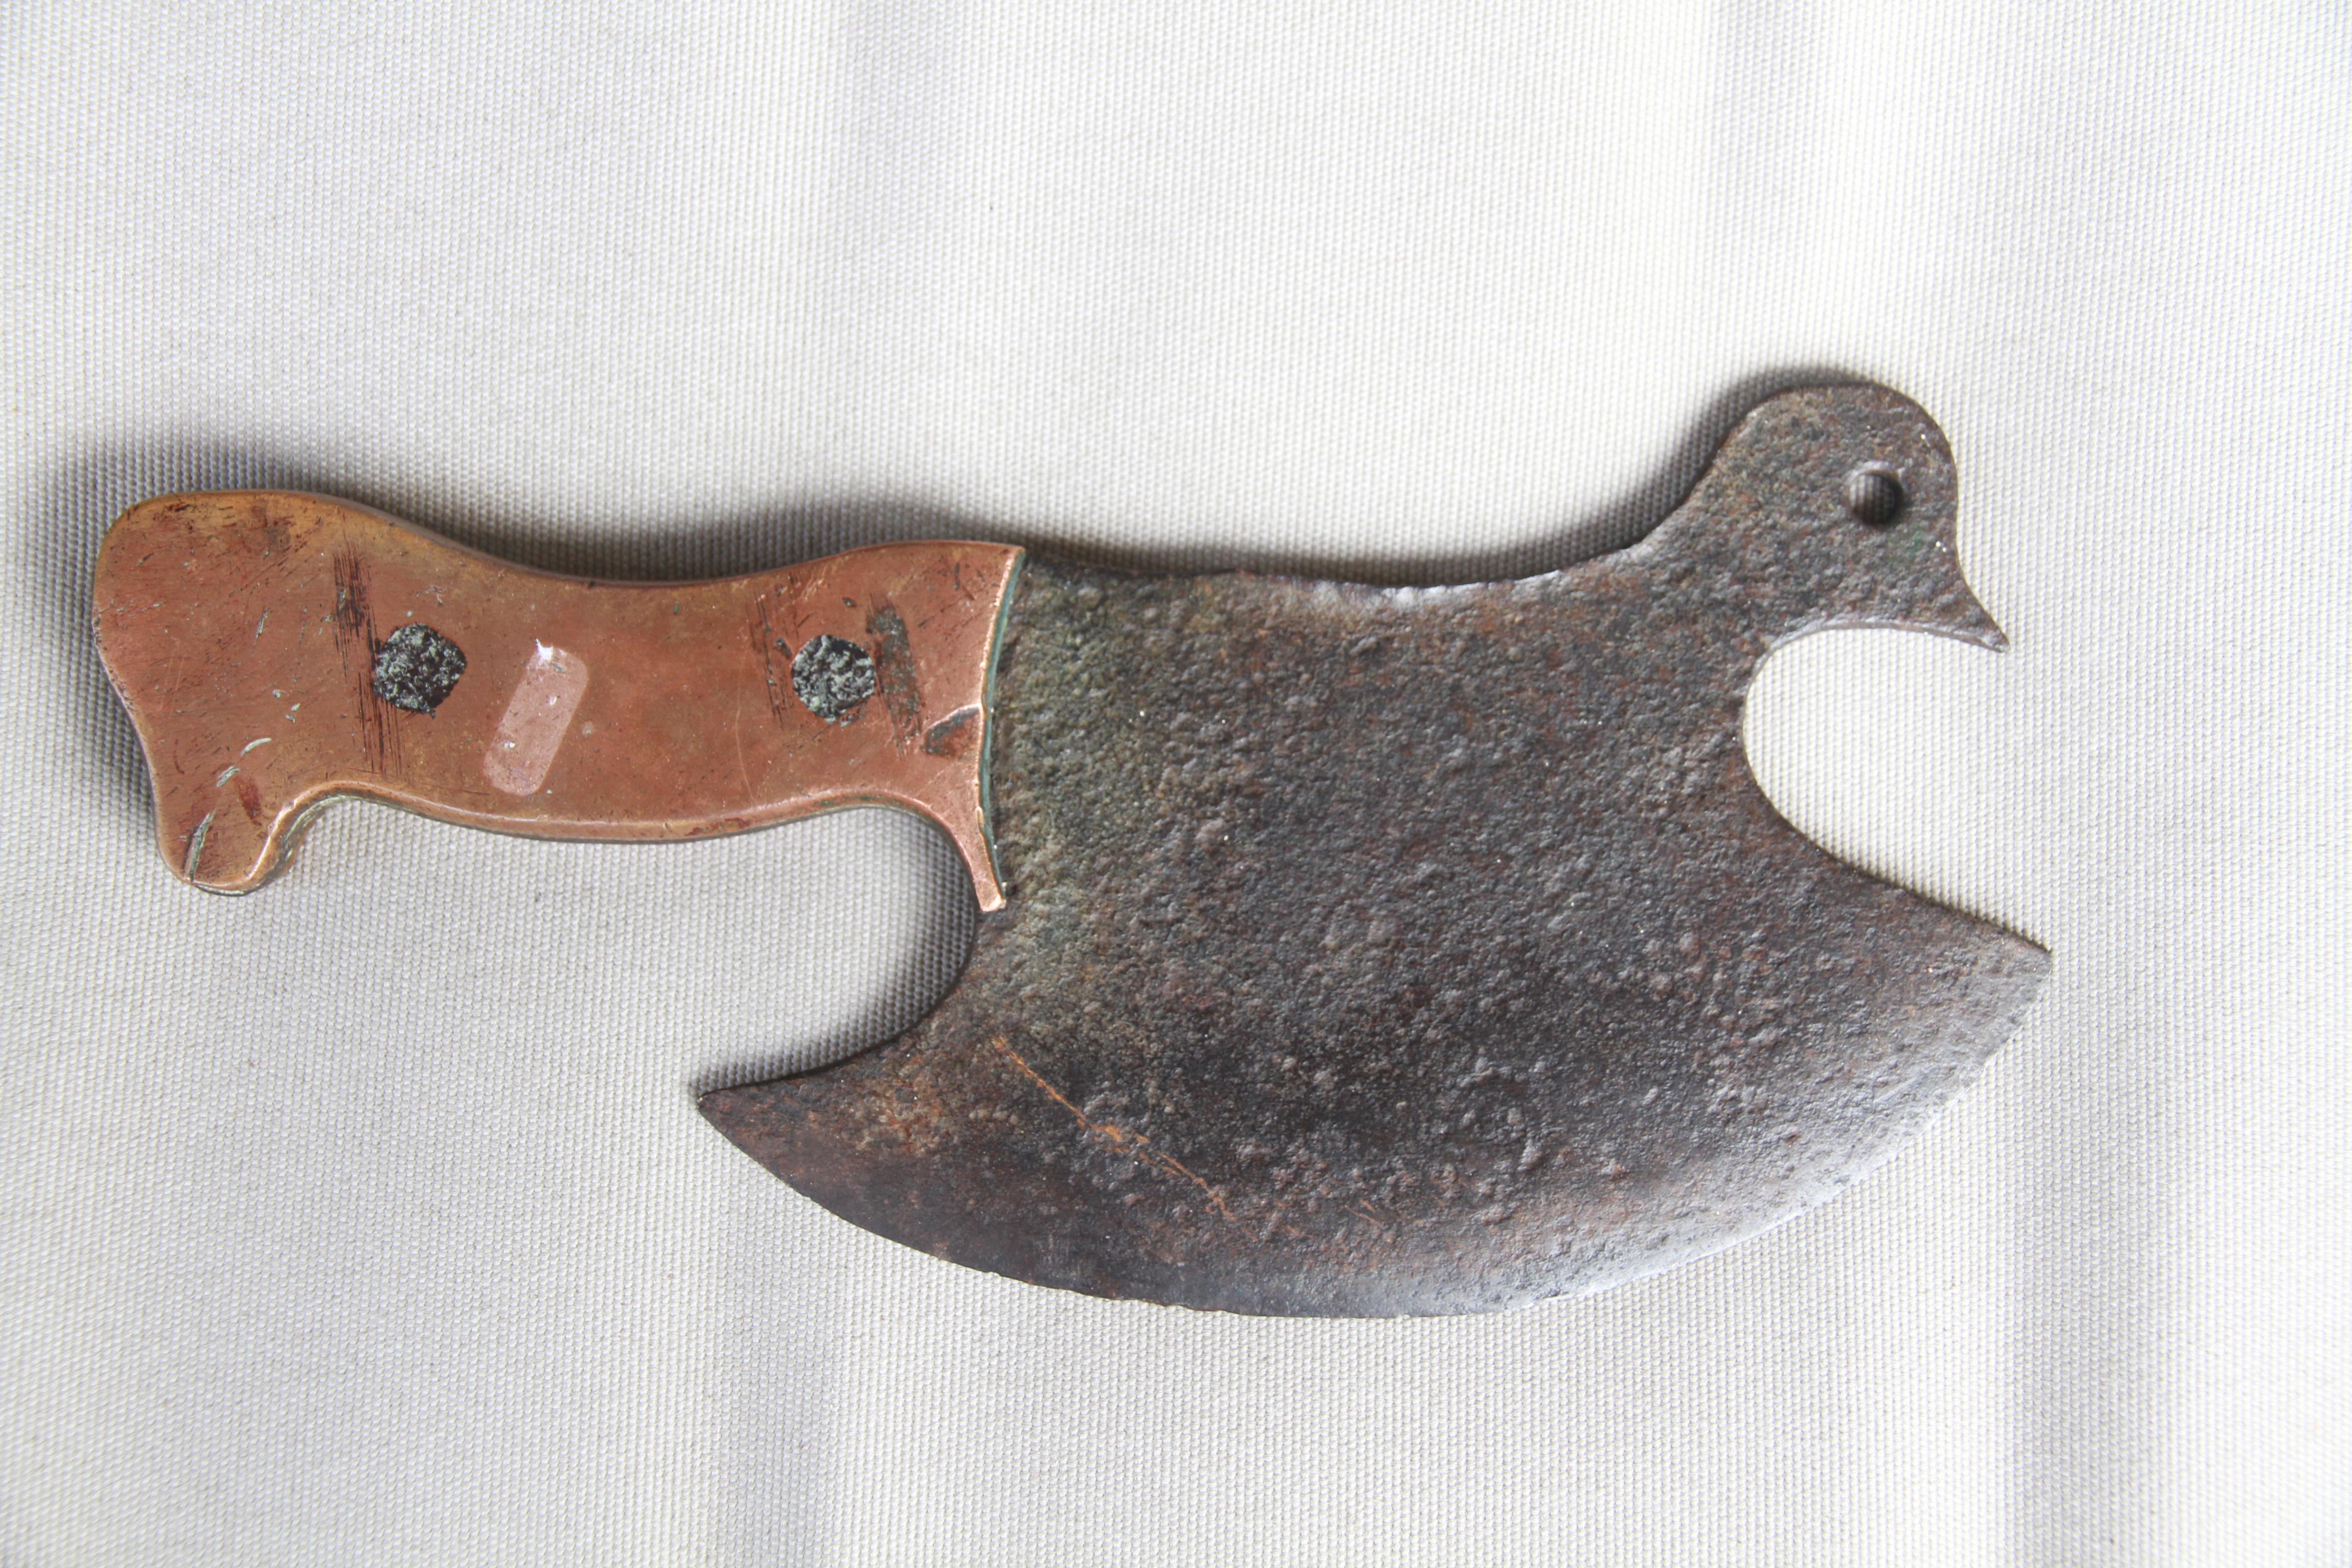 A delightful figurative butcher's cleaver from France in the shape of a bird. With a 7.25 inch blade, the integral handle has copper scales attached with iron rivets.